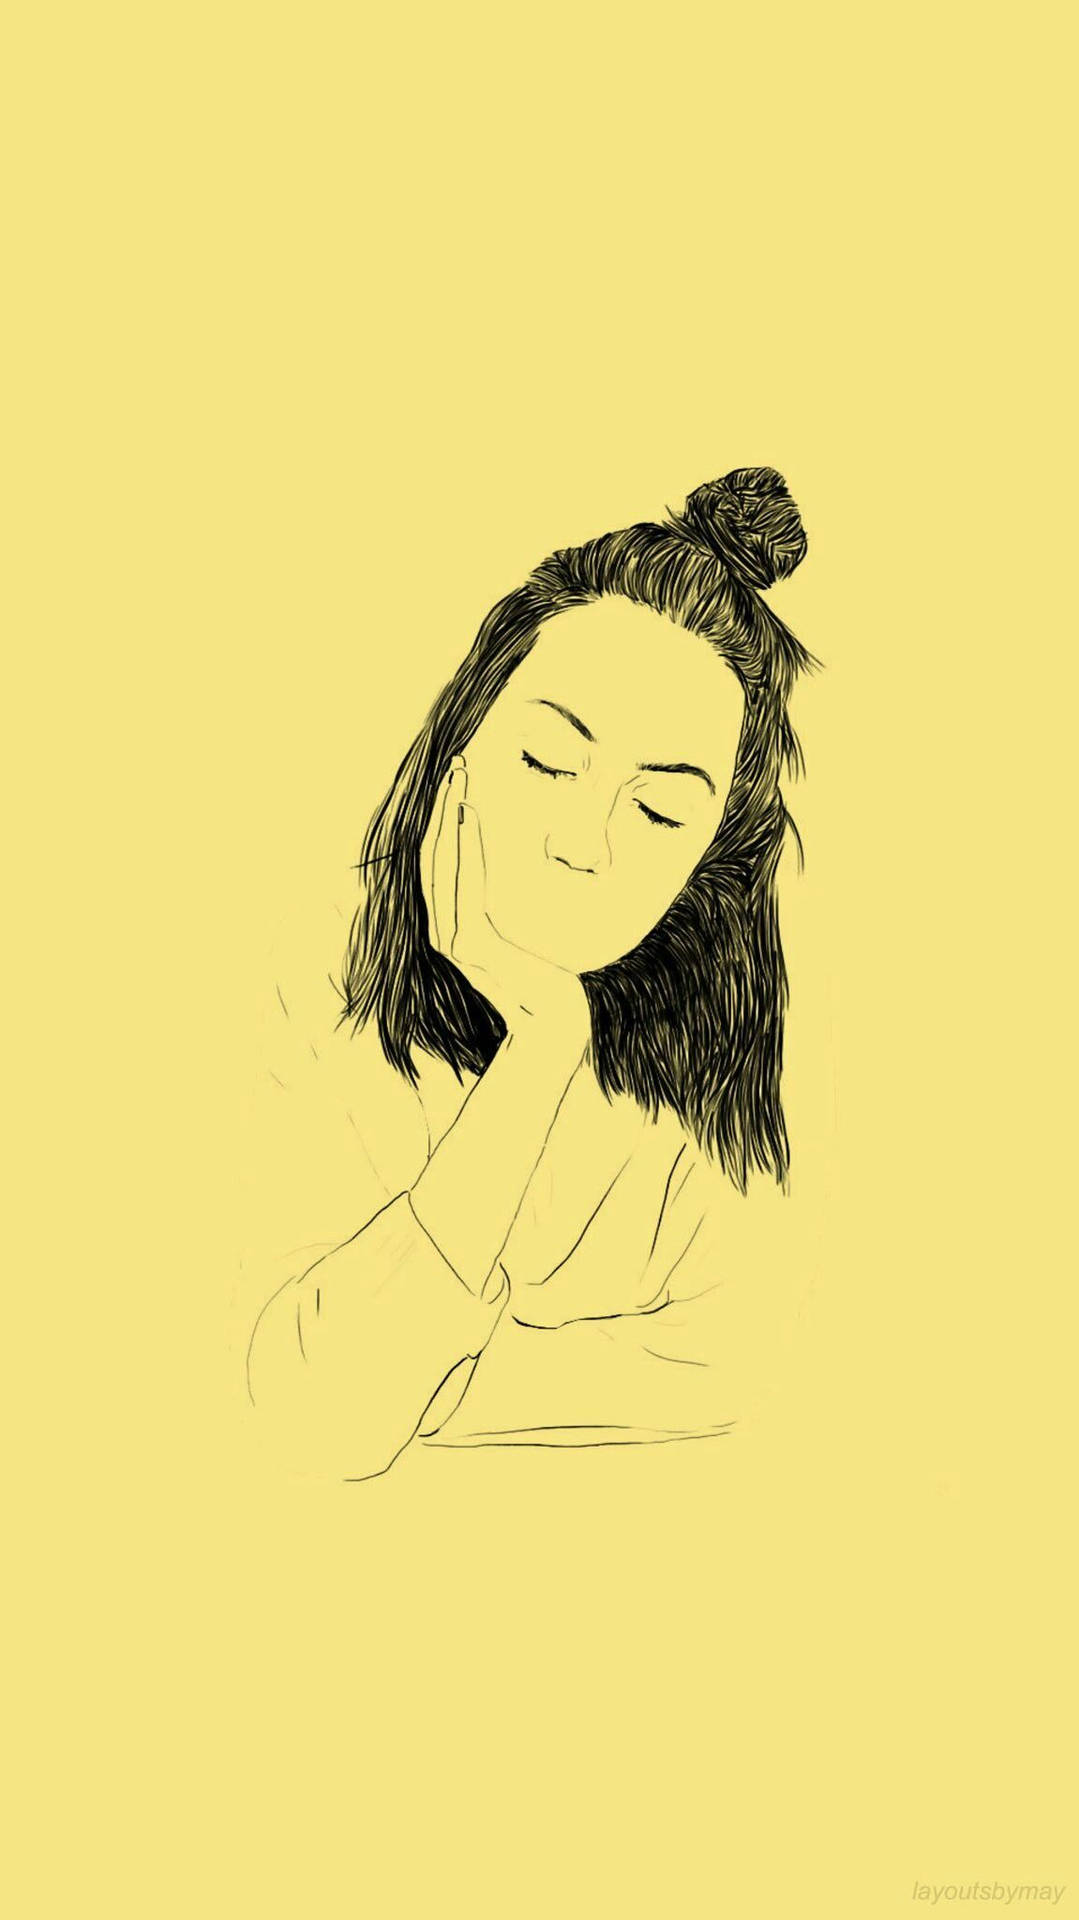 Pastel Yellow Aesthetic With Woman Sketch